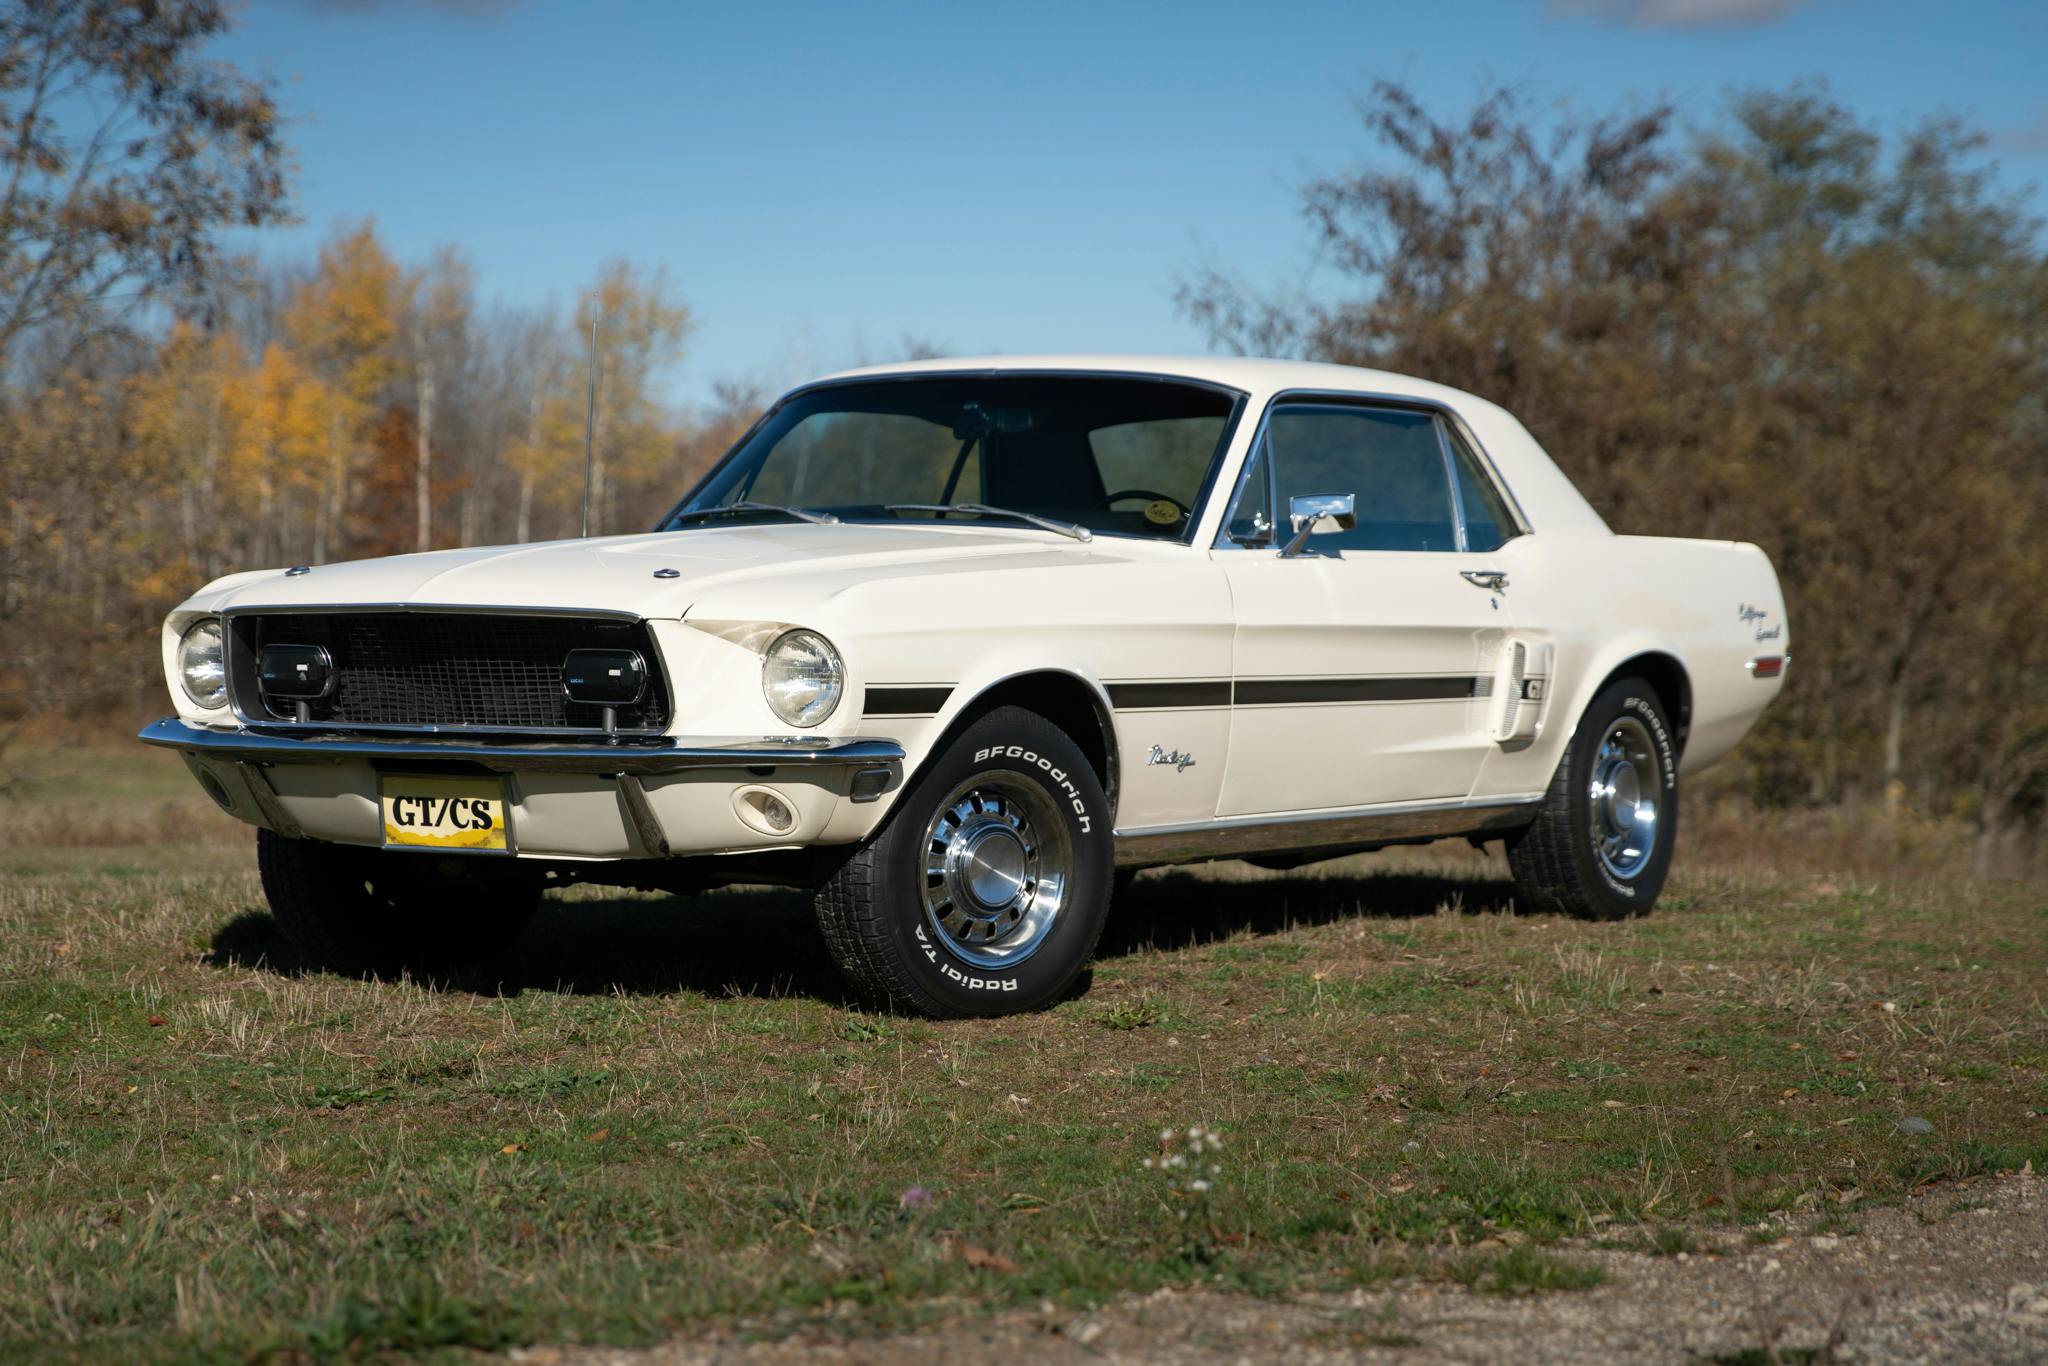 1968 Ford Mustang GT/CS California Special front three-quarter